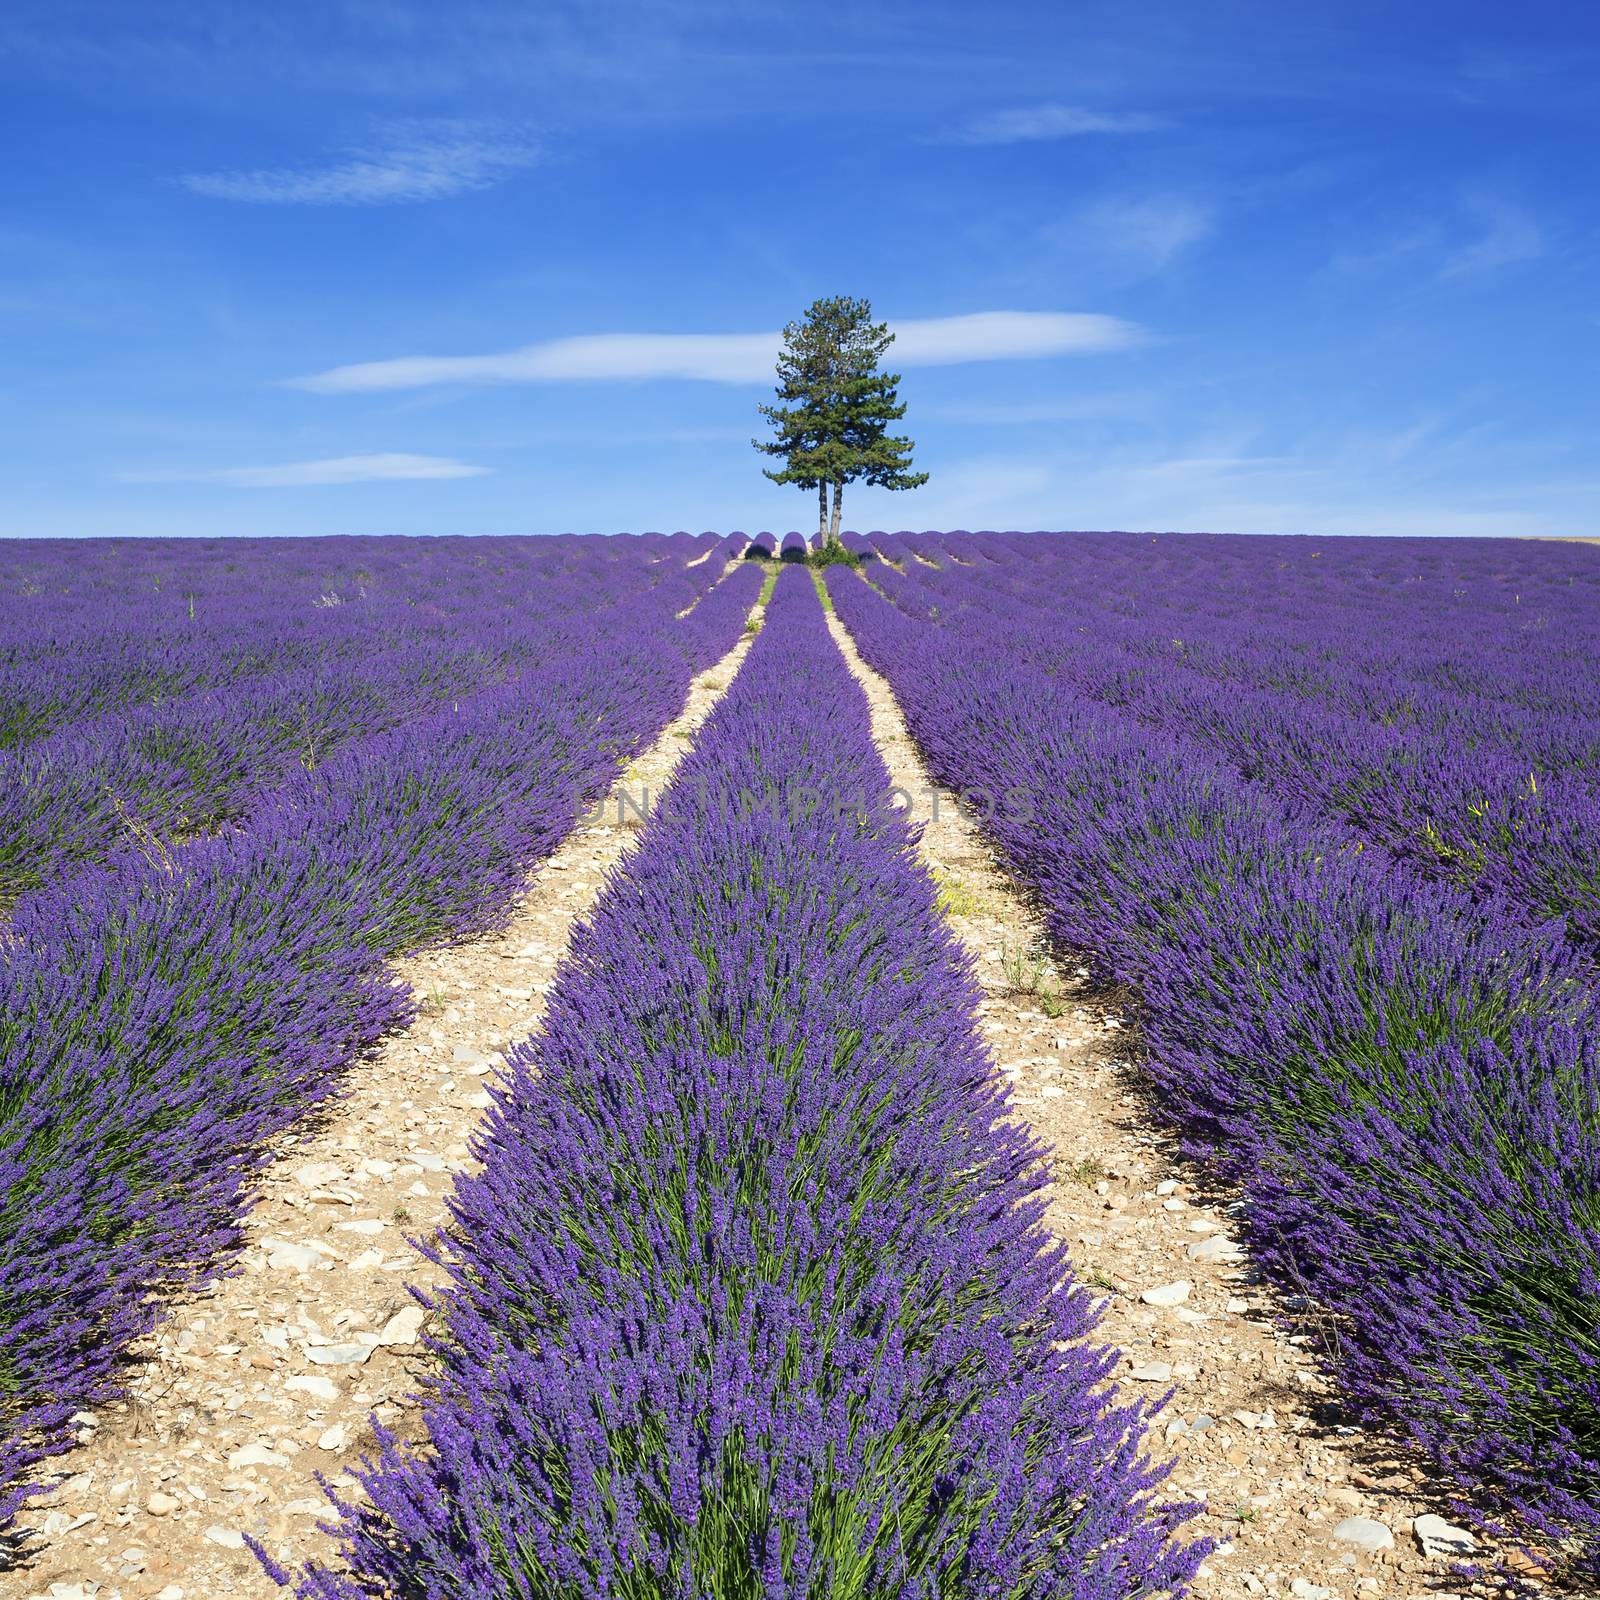 View of Lavender field with tree and blue sky, France